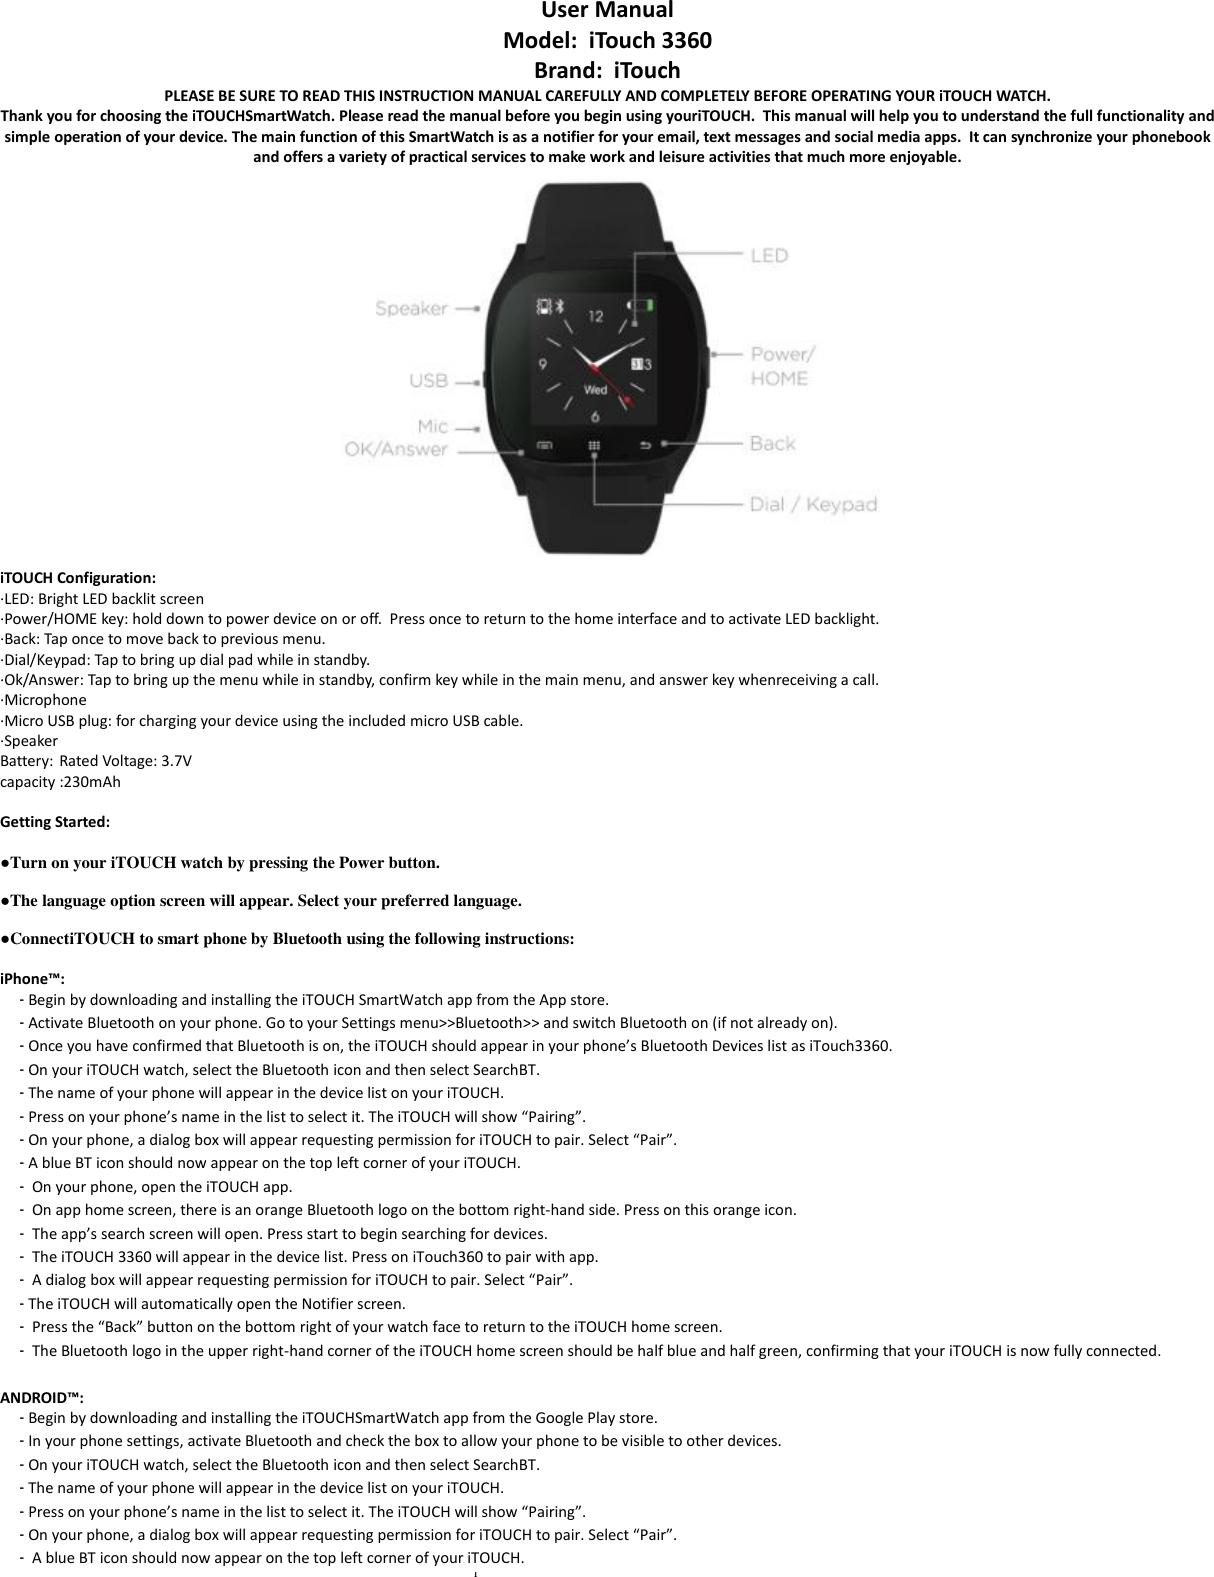 1  User Manual  Model:  iTouch 3360 Brand:  iTouch PLEASE BE SURE TO READ THIS INSTRUCTION MANUAL CAREFULLY AND COMPLETELY BEFORE OPERATING YOUR iTOUCH WATCH. Thank you for choosing the iTOUCHSmartWatch. Please read the manual before you begin using youriTOUCH.  This manual will help you to understand the full functionality and simple operation of your device. The main function of this SmartWatch is as a notifier for your email, text messages and social media apps.  It can synchronize your phonebook and offers a variety of practical services to make work and leisure activities that much more enjoyable.    iTOUCH Configuration: ·LED: Bright LED backlit screen ·Power/HOME key: hold down to power device on or off.  Press once to return to the home interface and to activate LED backlight. ·Back: Tap once to move back to previous menu. ·Dial/Keypad: Tap to bring up dial pad while in standby. ·Ok/Answer: Tap to bring up the menu while in standby, confirm key while in the main menu, and answer key whenreceiving a call. ·Microphone ·Micro USB plug: for charging your device using the included micro USB cable. ·Speaker Battery: Rated Voltage: 3.7V capacity :230mAh  Getting Started:  ●Turn on your iTOUCH watch by pressing the Power button.  ●The language option screen will appear. Select your preferred language.  ●ConnectiTOUCH to smart phone by Bluetooth using the following instructions:  iPhone™: - Begin by downloading and installing the iTOUCH SmartWatch app from the App store.   - Activate Bluetooth on your phone. Go to your Settings menu&gt;&gt;Bluetooth&gt;&gt; and switch Bluetooth on (if not already on). - Once you have confirmed that Bluetooth is on, the iTOUCH should appear in your phone’s Bluetooth Devices list as iTouch3360.   - On your iTOUCH watch, select the Bluetooth icon and then select SearchBT. - The name of your phone will appear in the device list on your iTOUCH.  - Press on your phone’s name in the list to select it. The iTOUCH will show “Pairing”. - On your phone, a dialog box will appear requesting permission for iTOUCH to pair. Select “Pair”. - A blue BT icon should now appear on the top left corner of your iTOUCH. -  On your phone, open the iTOUCH app. -  On app home screen, there is an orange Bluetooth logo on the bottom right-hand side. Press on this orange icon. -  The app’s search screen will open. Press start to begin searching for devices.  -  The iTOUCH 3360 will appear in the device list. Press on iTouch360 to pair with app. -  A dialog box will appear requesting permission for iTOUCH to pair. Select “Pair”. - The iTOUCH will automatically open the Notifier screen.  -  Press the “Back” button on the bottom right of your watch face to return to the iTOUCH home screen. -  The Bluetooth logo in the upper right-hand corner of the iTOUCH home screen should be half blue and half green, confirming that your iTOUCH is now fully connected.  ANDROID™: - Begin by downloading and installing the iTOUCHSmartWatch app from the Google Play store.  - In your phone settings, activate Bluetooth and check the box to allow your phone to be visible to other devices. - On your iTOUCH watch, select the Bluetooth icon and then select SearchBT. - The name of your phone will appear in the device list on your iTOUCH.  - Press on your phone’s name in the list to select it. The iTOUCH will show “Pairing”. - On your phone, a dialog box will appear requesting permission for iTOUCH to pair. Select “Pair”. -  A blue BT icon should now appear on the top left corner of your iTOUCH. 